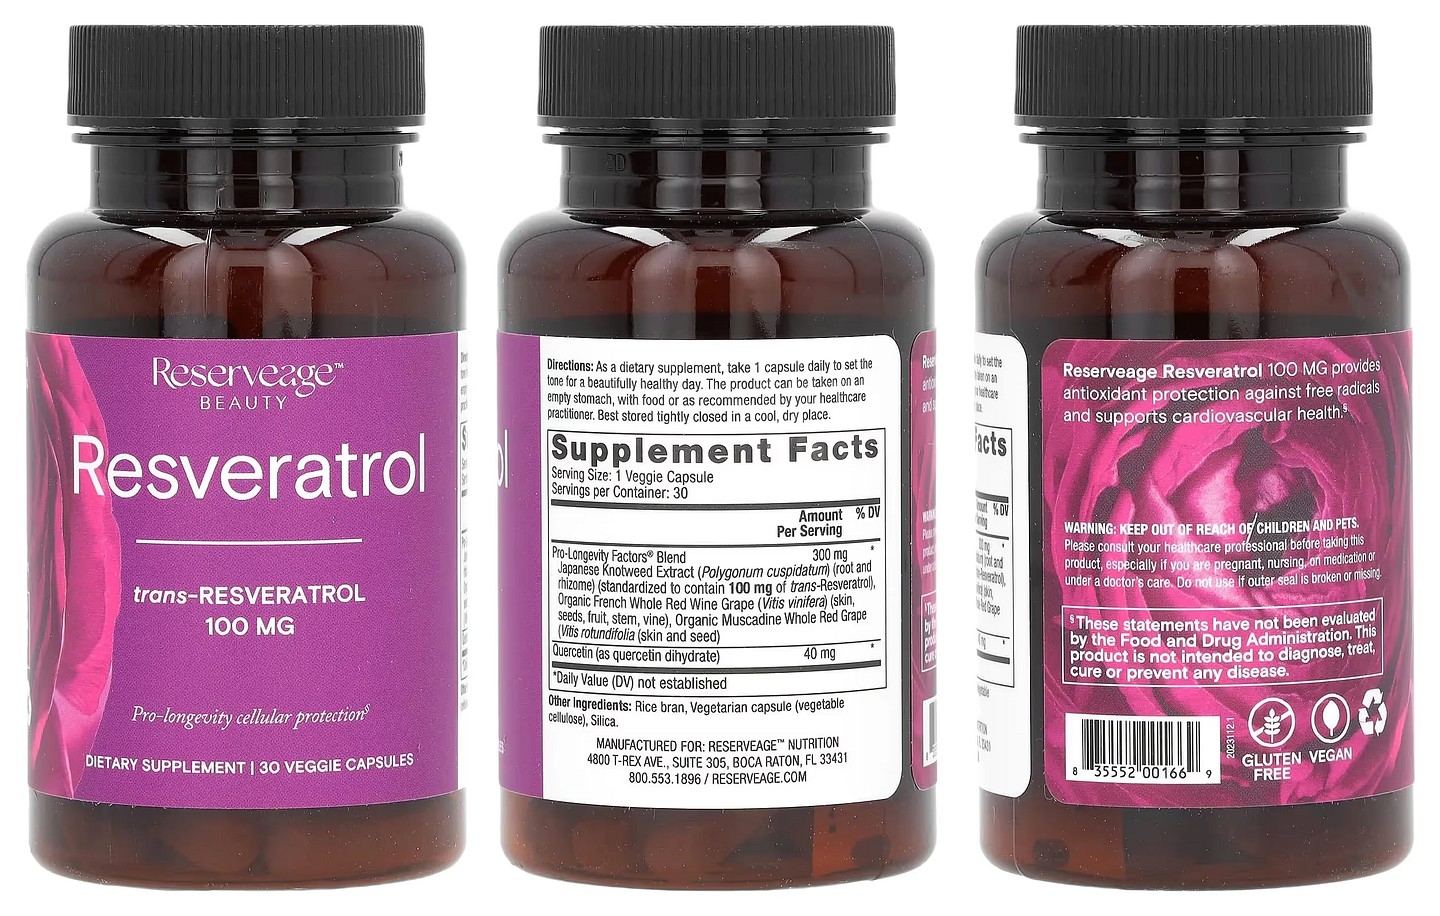 Reserveage Nutrition, Resveratrol packaging